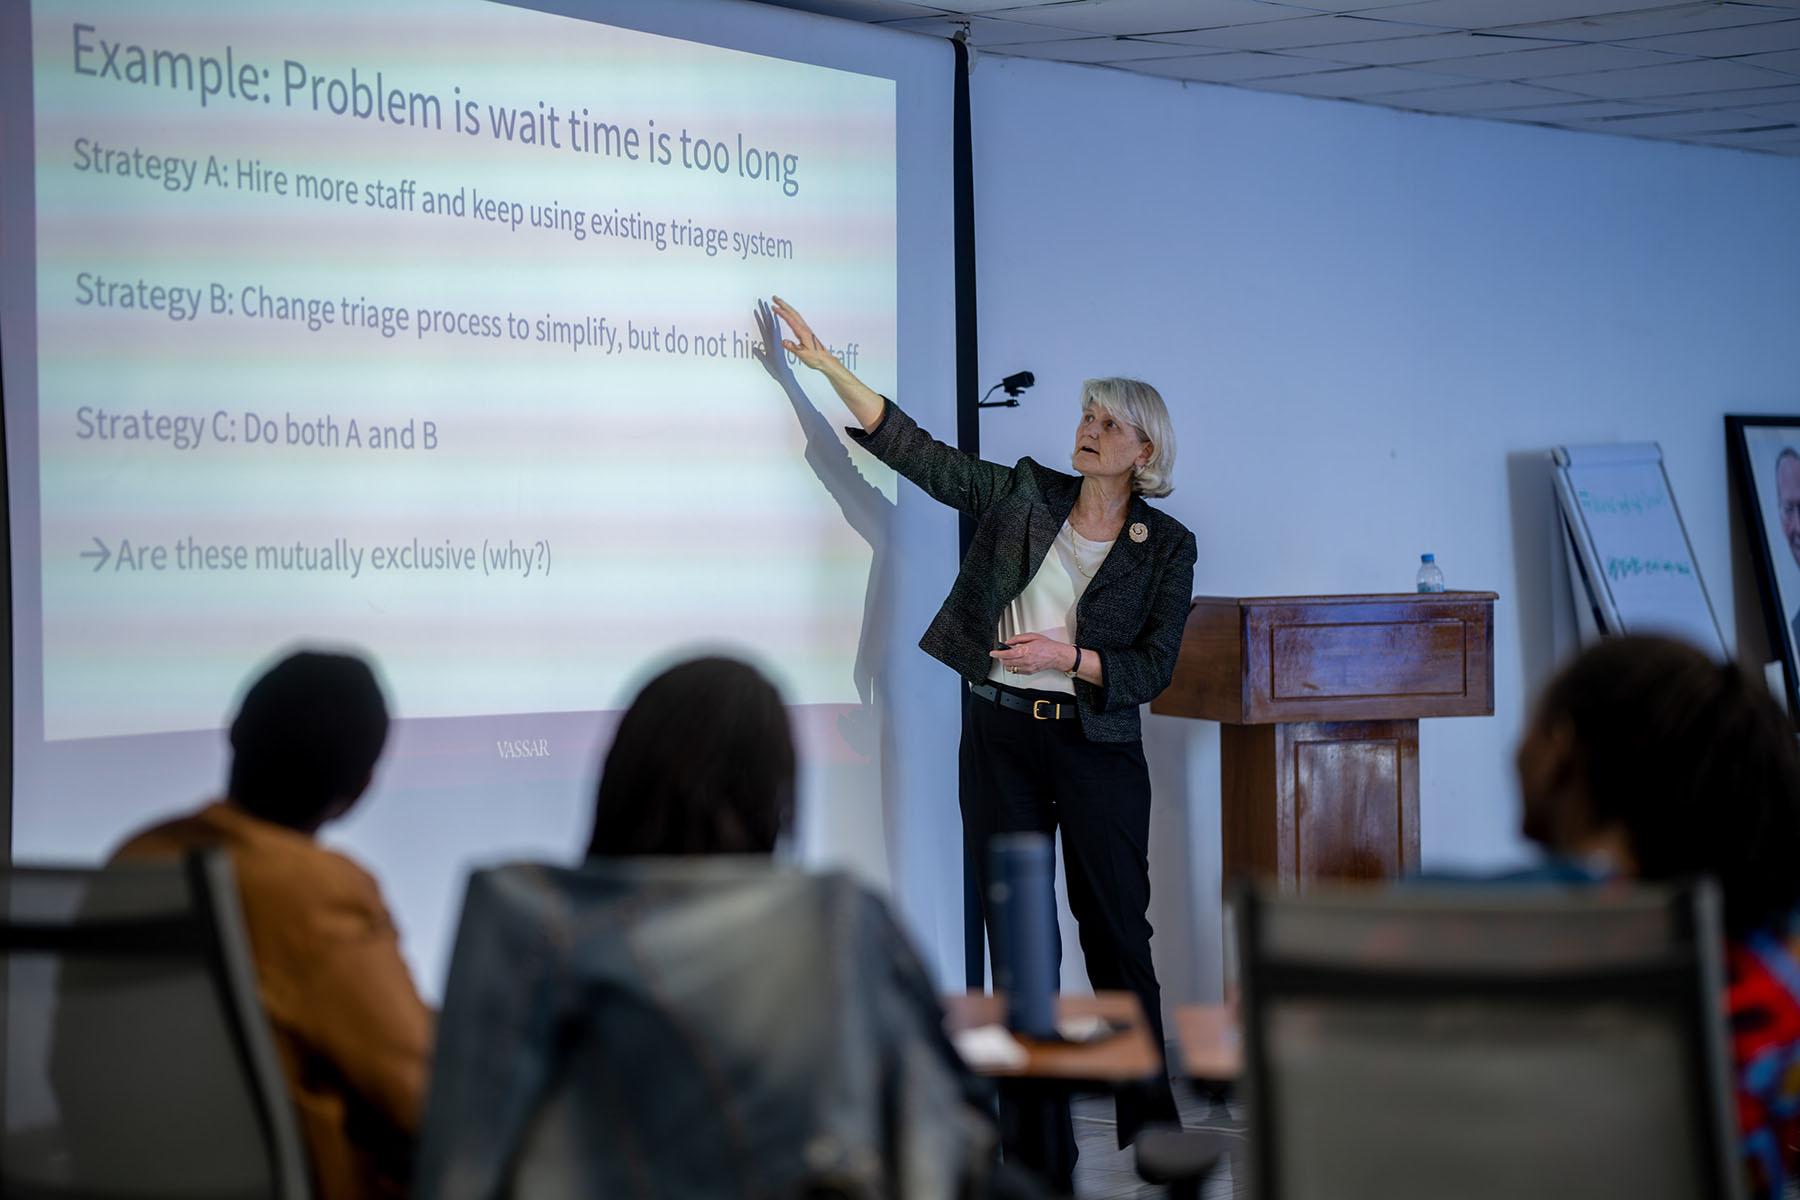 Pictured: Elizabeth Bradley. Standing in front of a classroom of seated students pointing at a projected image on a screen.